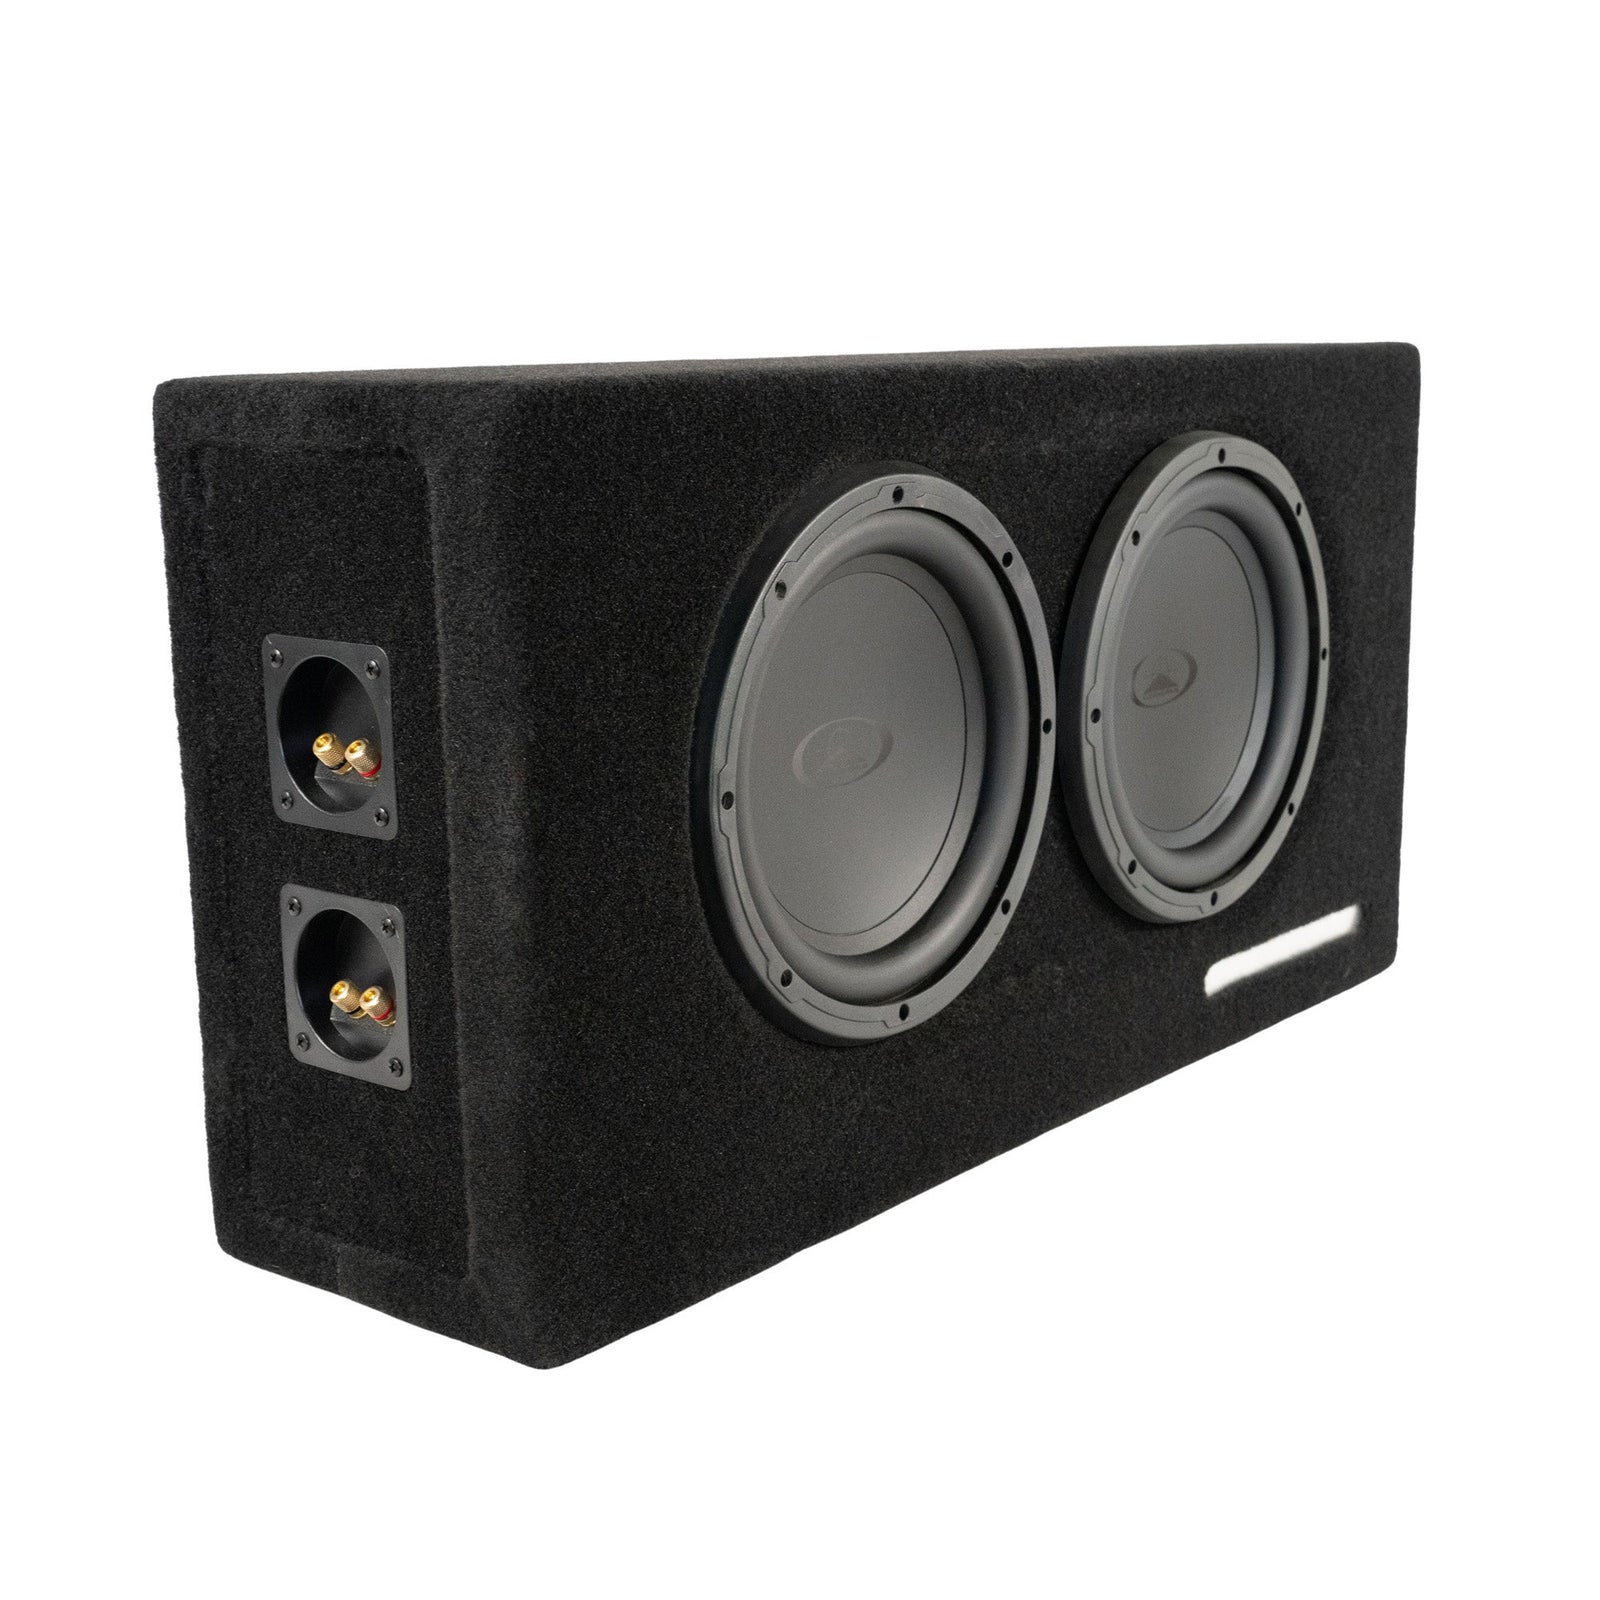 Big Bass, Small Space? Audiomobile GTS 2110 Delivers | Proline X